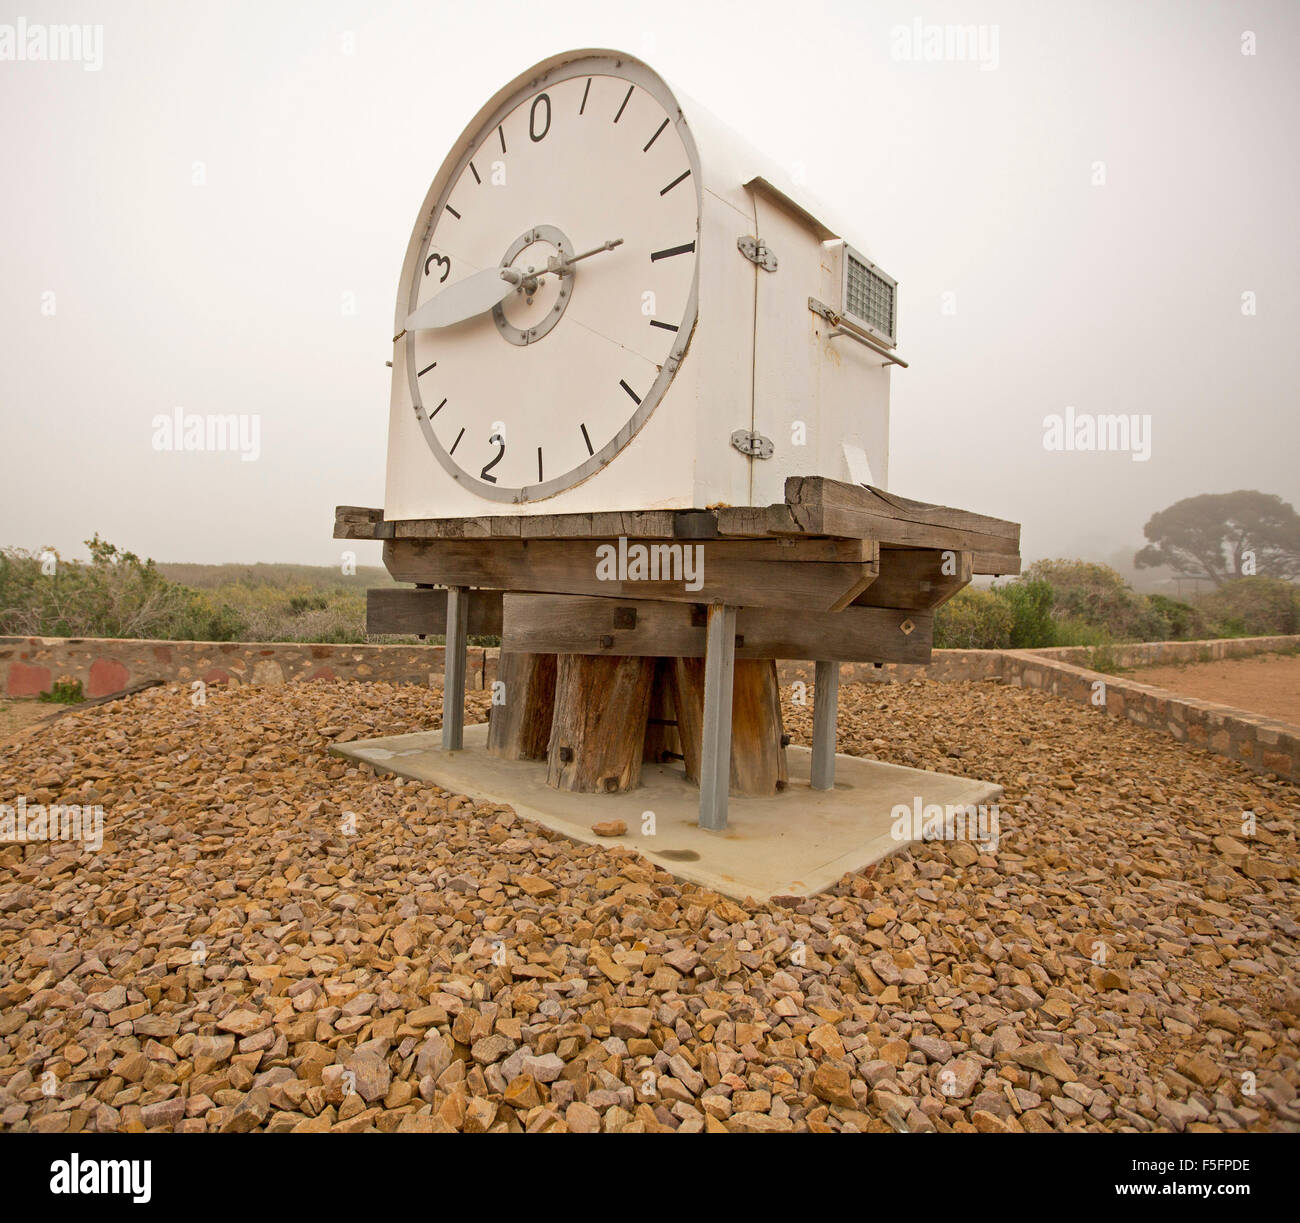 Historic clock-faced tide gauge, rare maritime instrument for measuring  depth of ocean water to aid shipping, Port Germein SA Stock Photo - Alamy